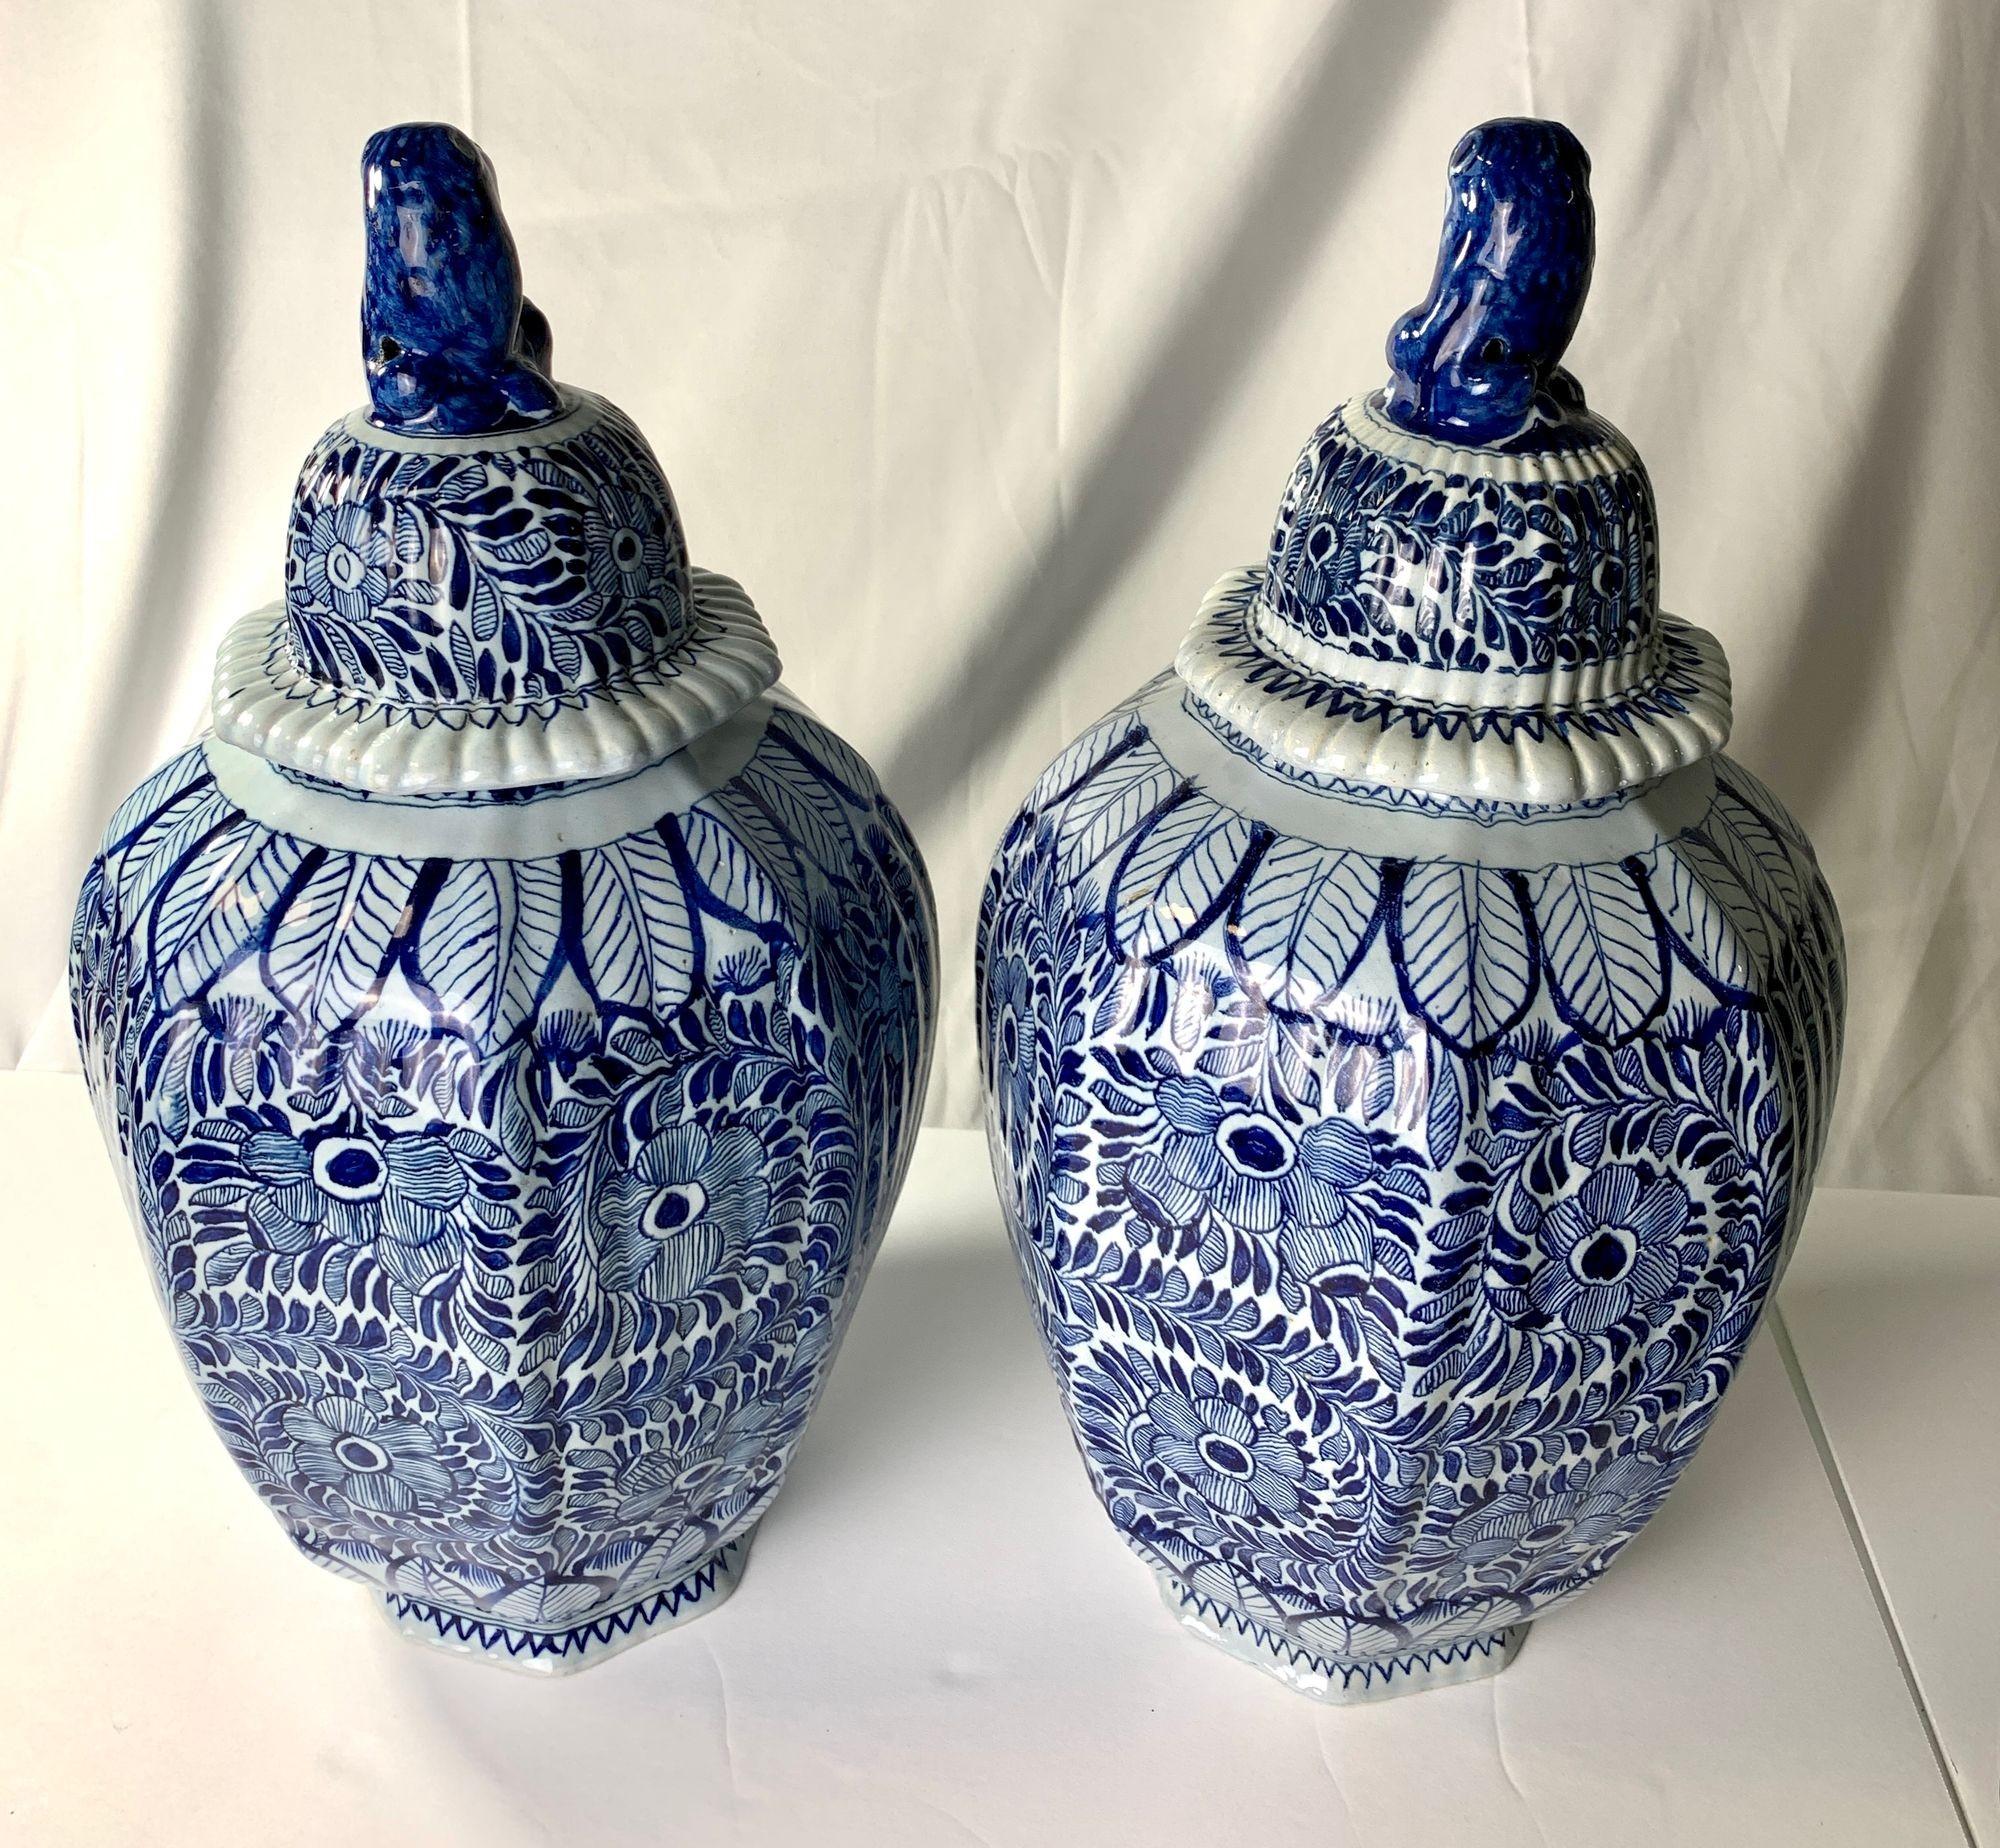 Pair Large Blue and White Delft Jars Made Netherlands 18th Century Circa 1780 For Sale 1